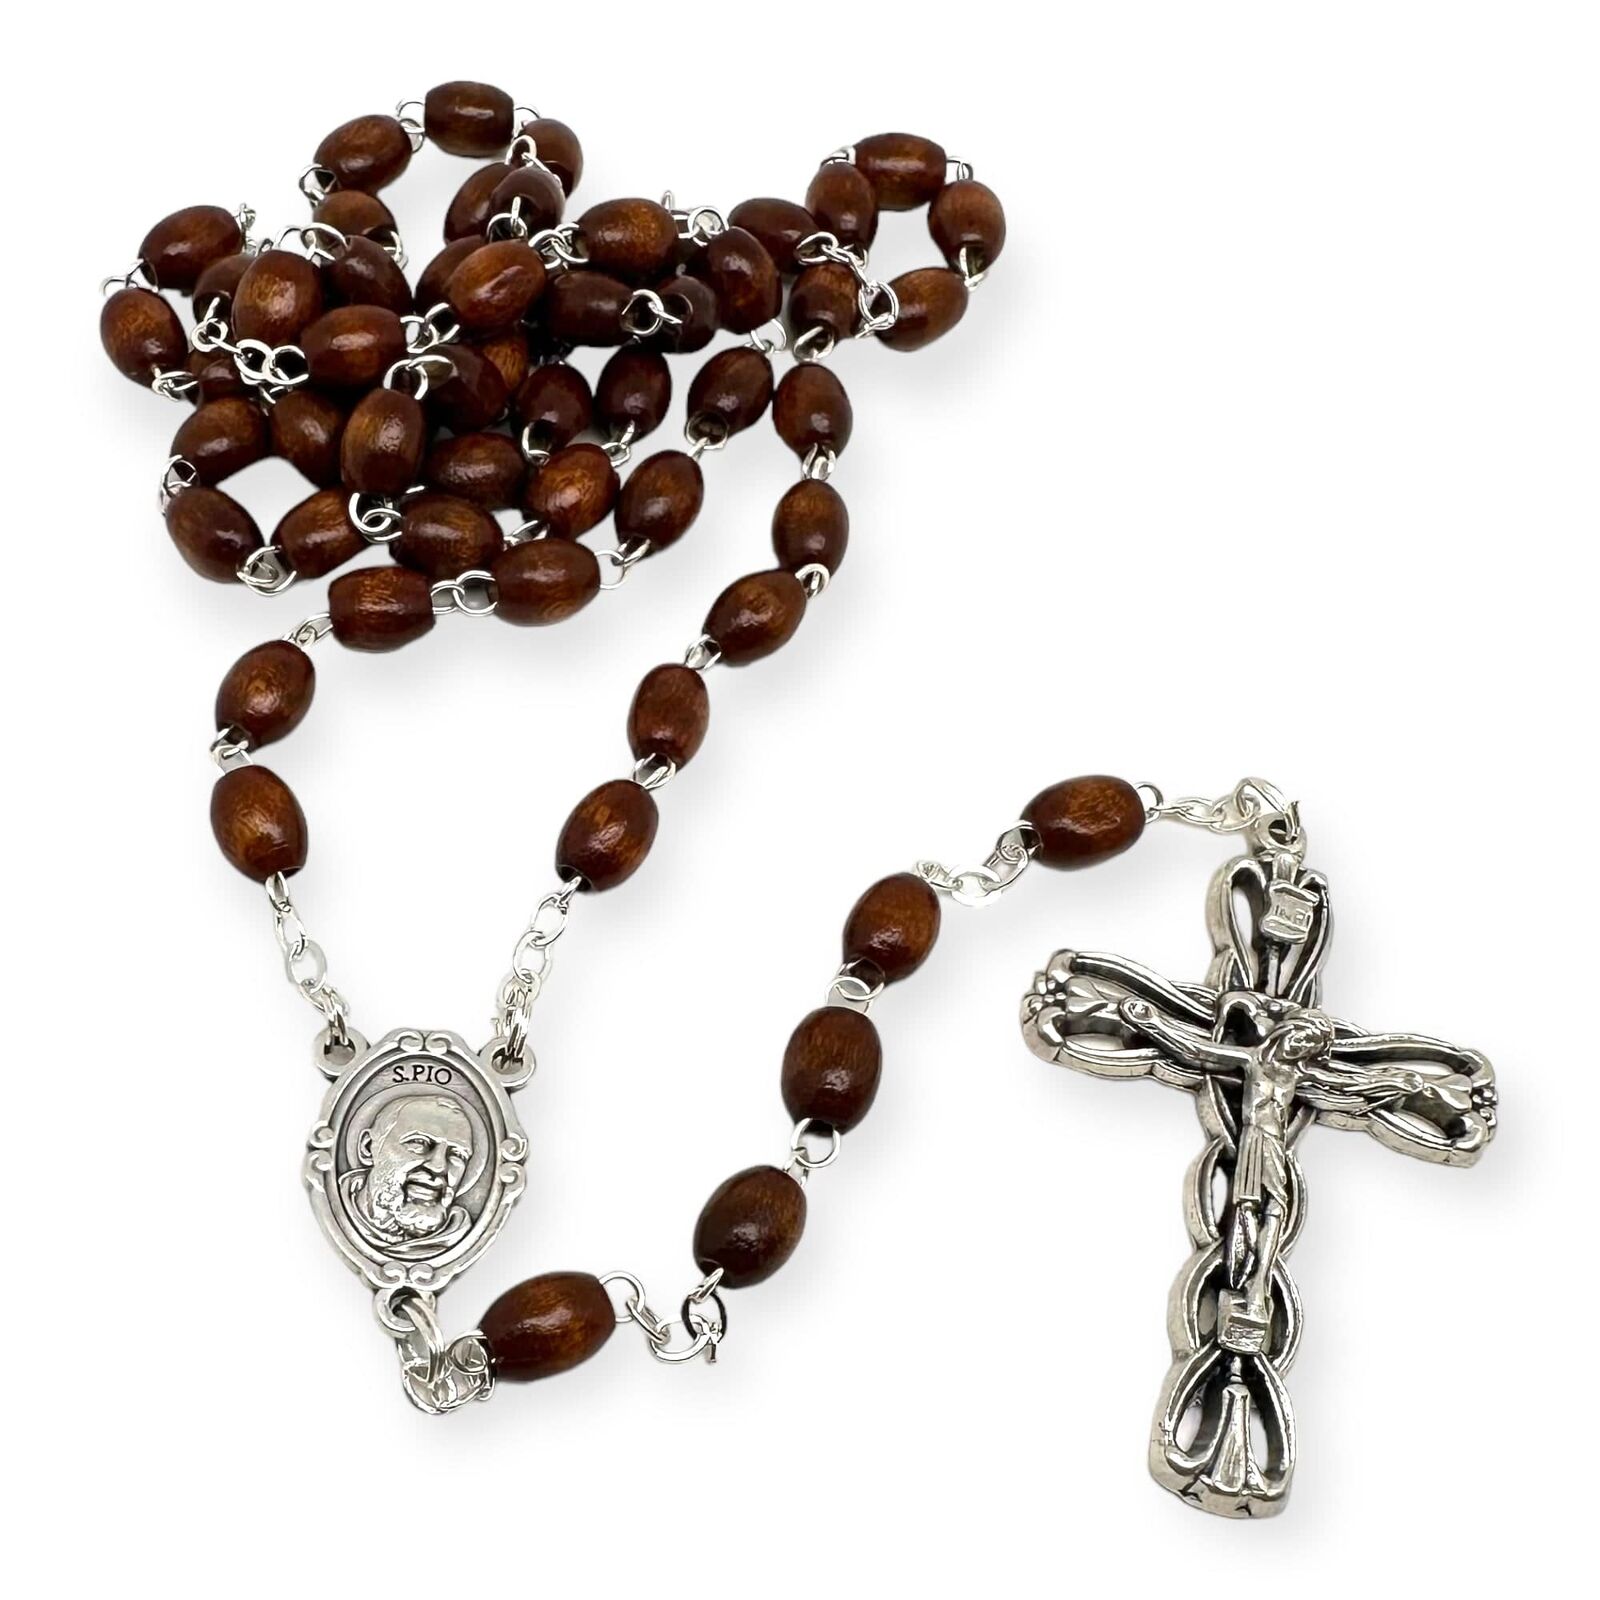 Saint Padre Pio Rosary Blessed By Pope w/ 2nd Class Relic - St. Father Pio